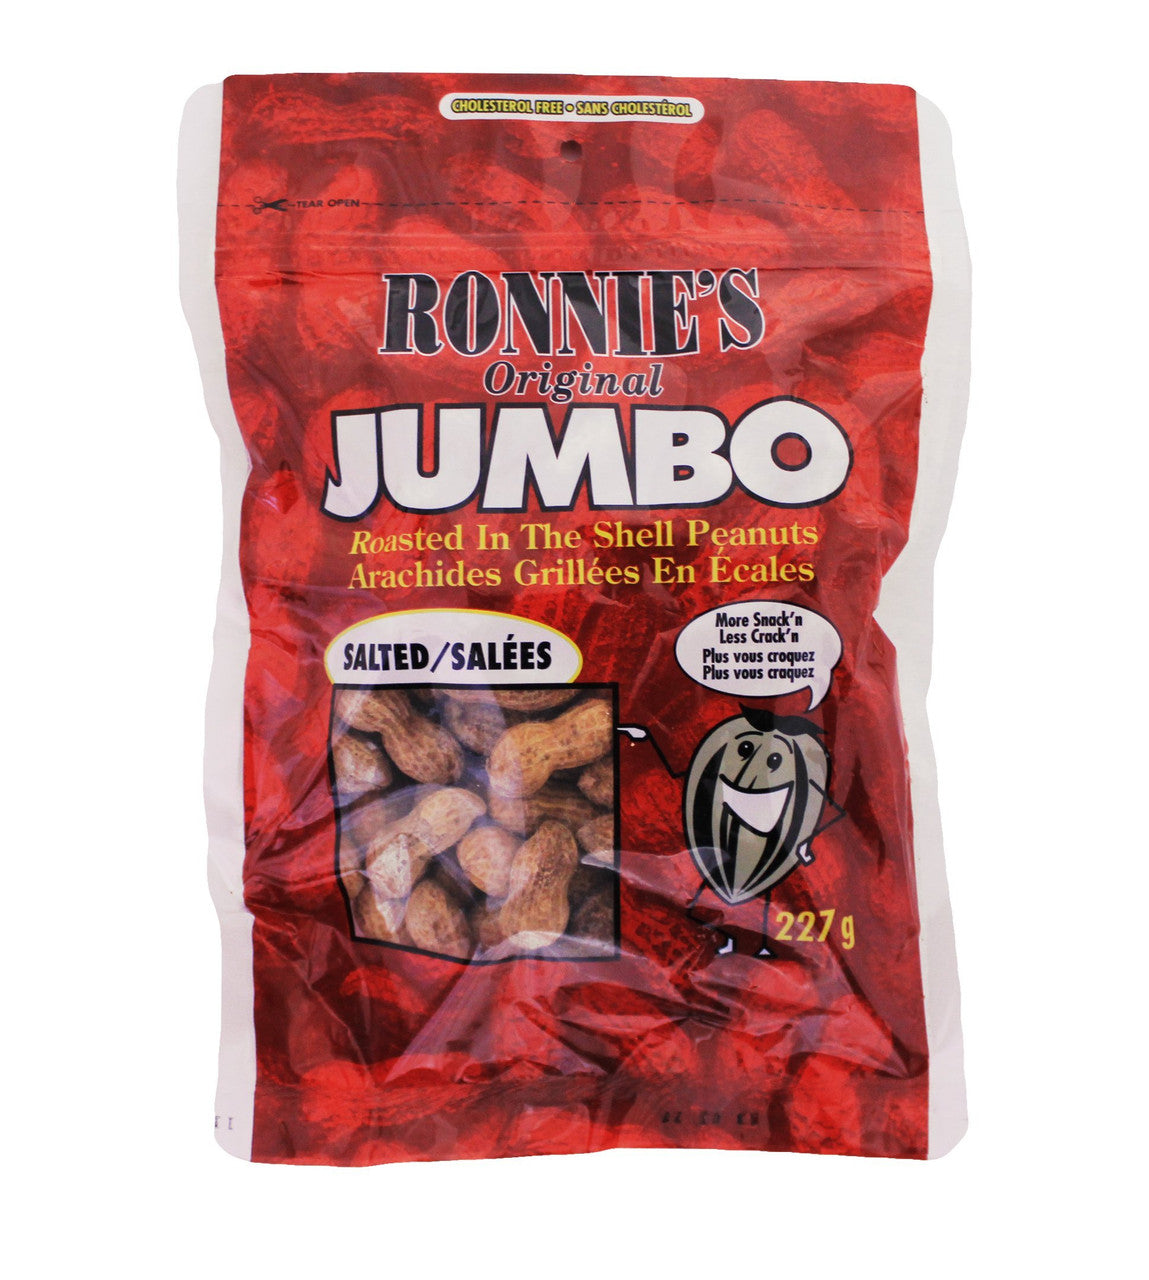 Ronnies Jumbo Roasted In The Shell Peanuts Salted 227g{Imported from Canada}